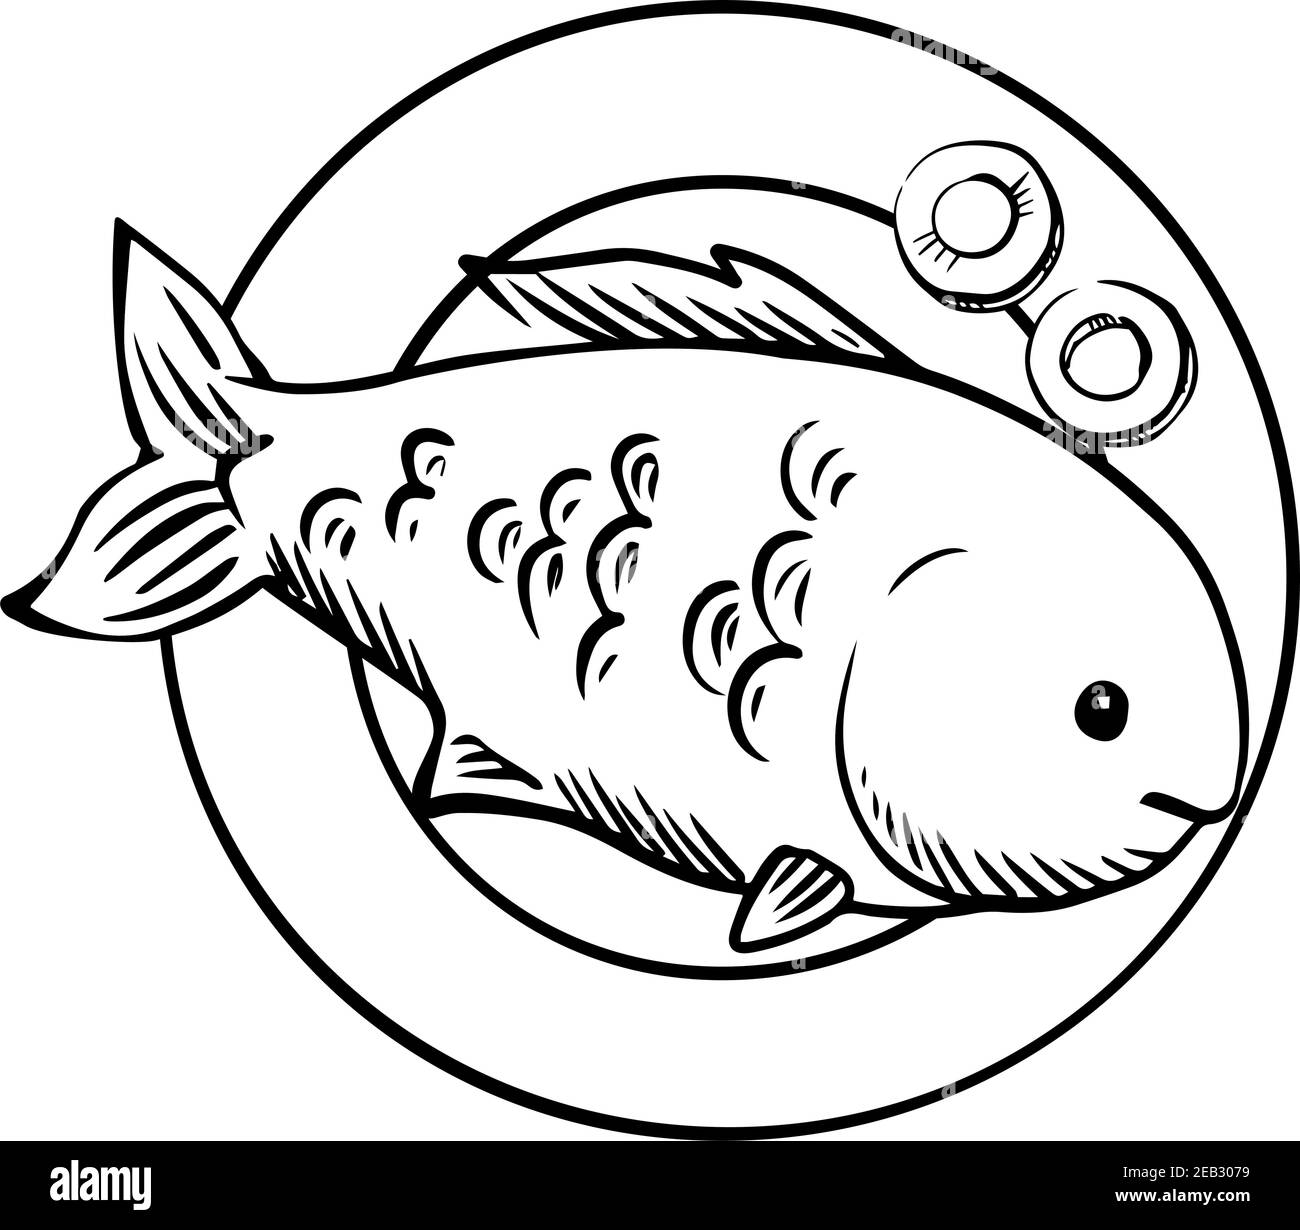 Fish recipe cooked fish Stock Vector Images - Alamy